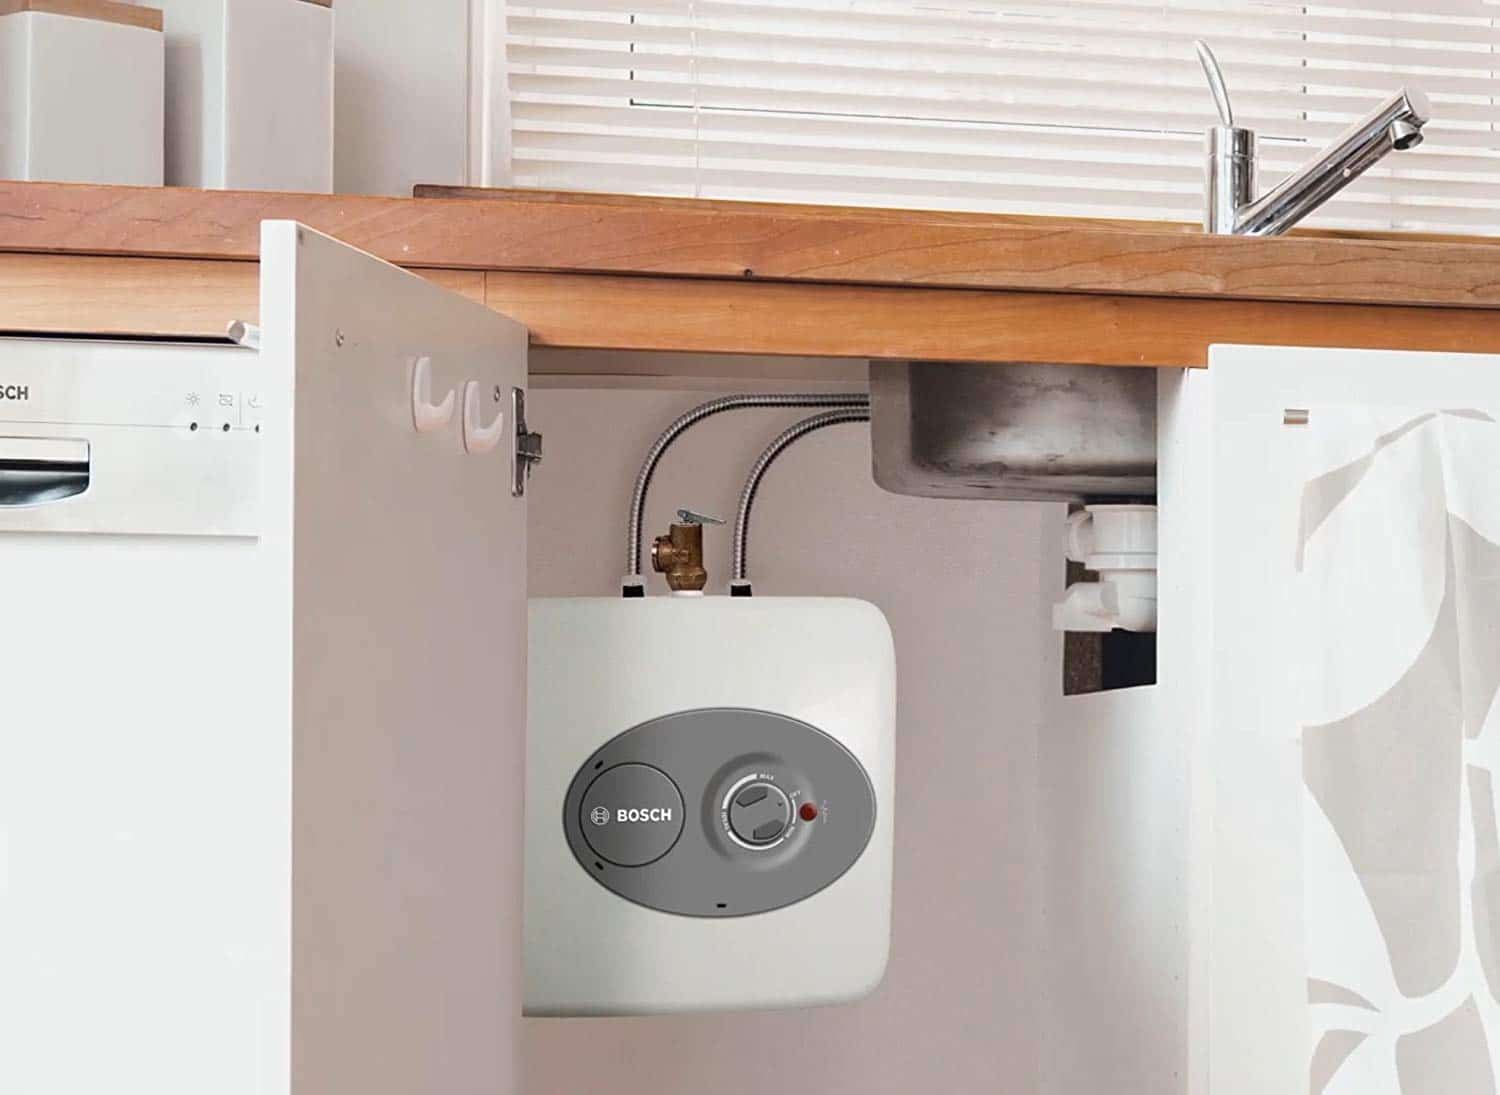 electric tankless water heater for kitchen sink